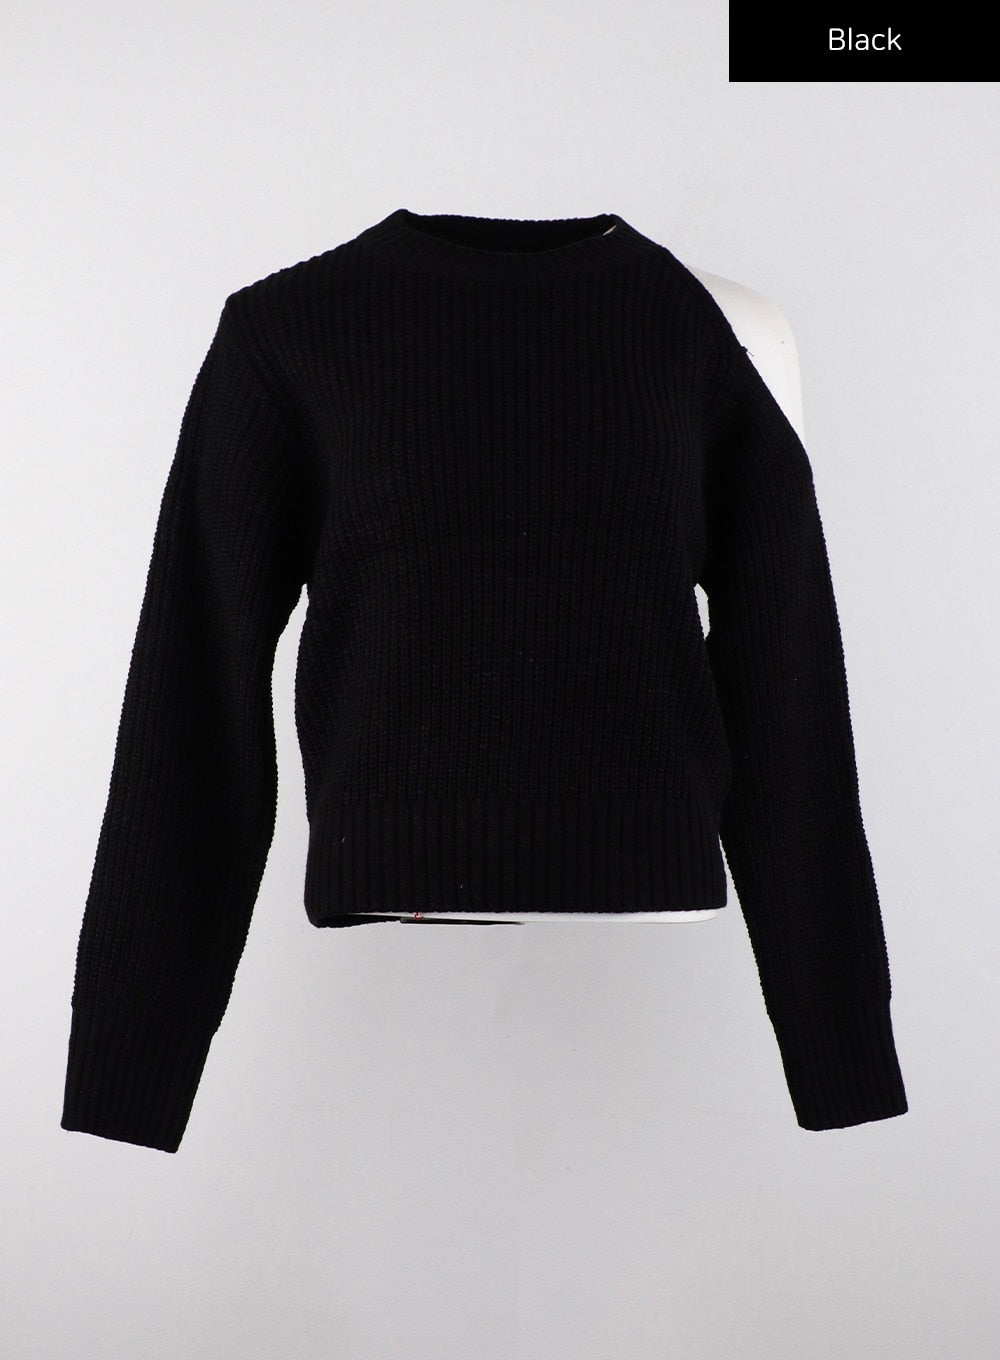 cut-out-knit-sweater-cd312 / Black